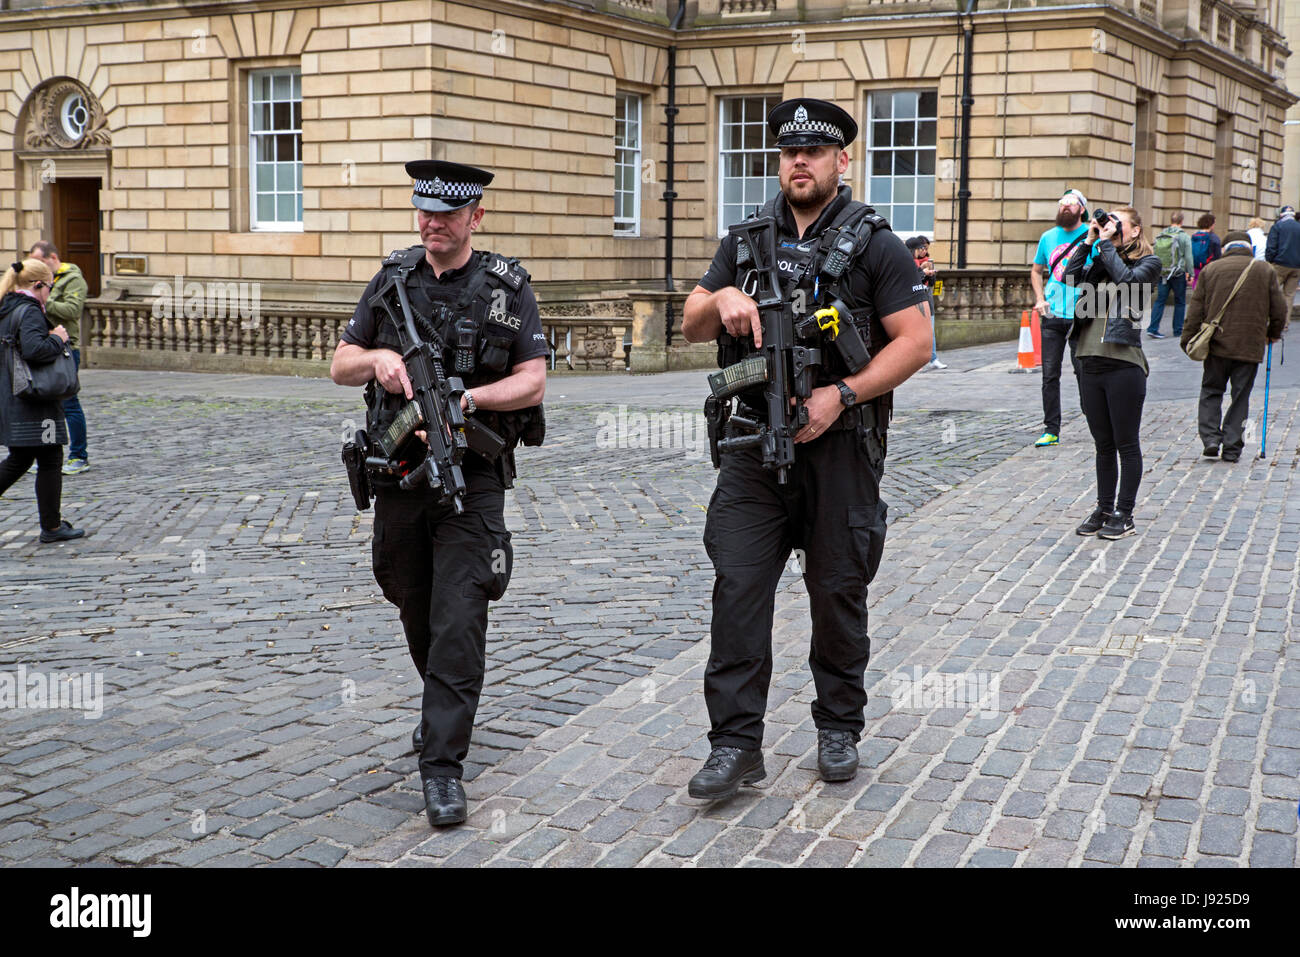 Armed police patrol the High Street in Edinburgh after the threat level was raised to 'critical' following the attack in Manchester. Stock Photo